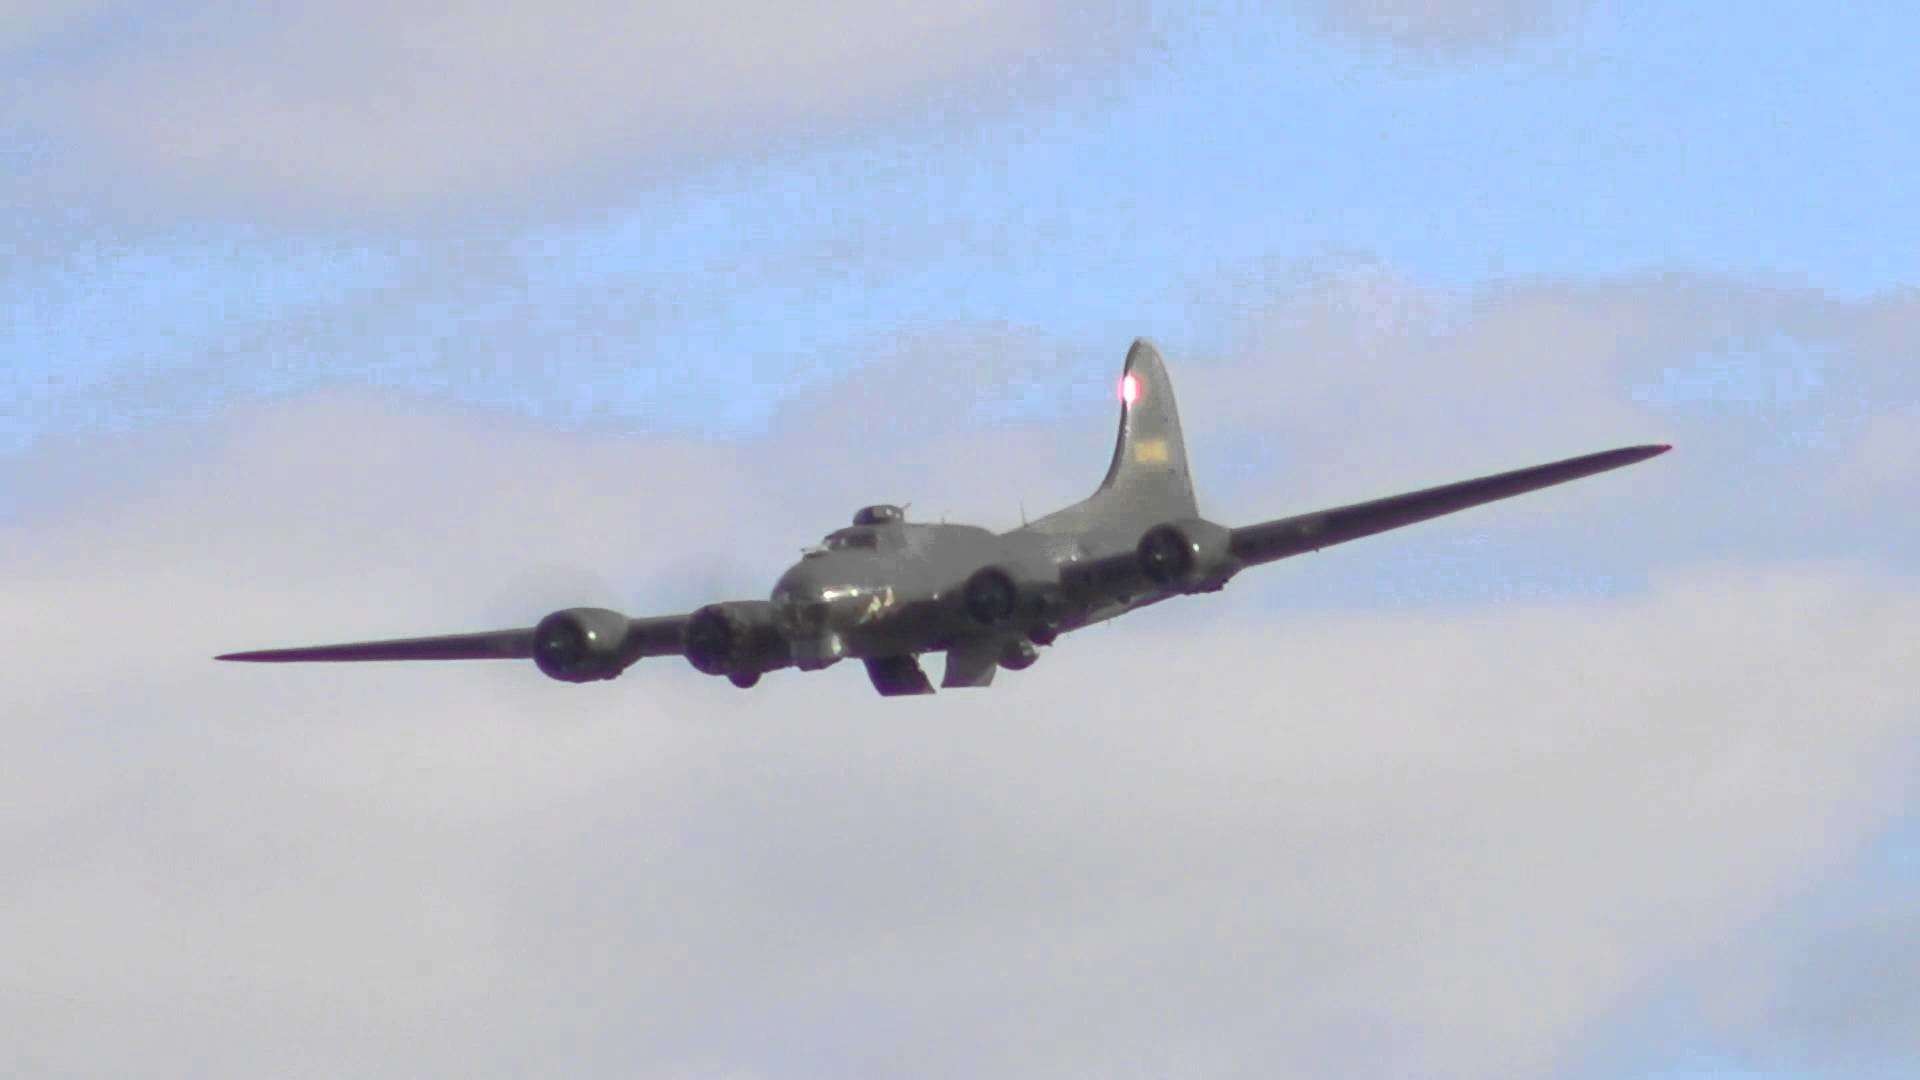 1920x1080 Boeing B-17 Flying Fortress, 'Sally B' - Duxford Battle of Britain 75  Airshow 2015